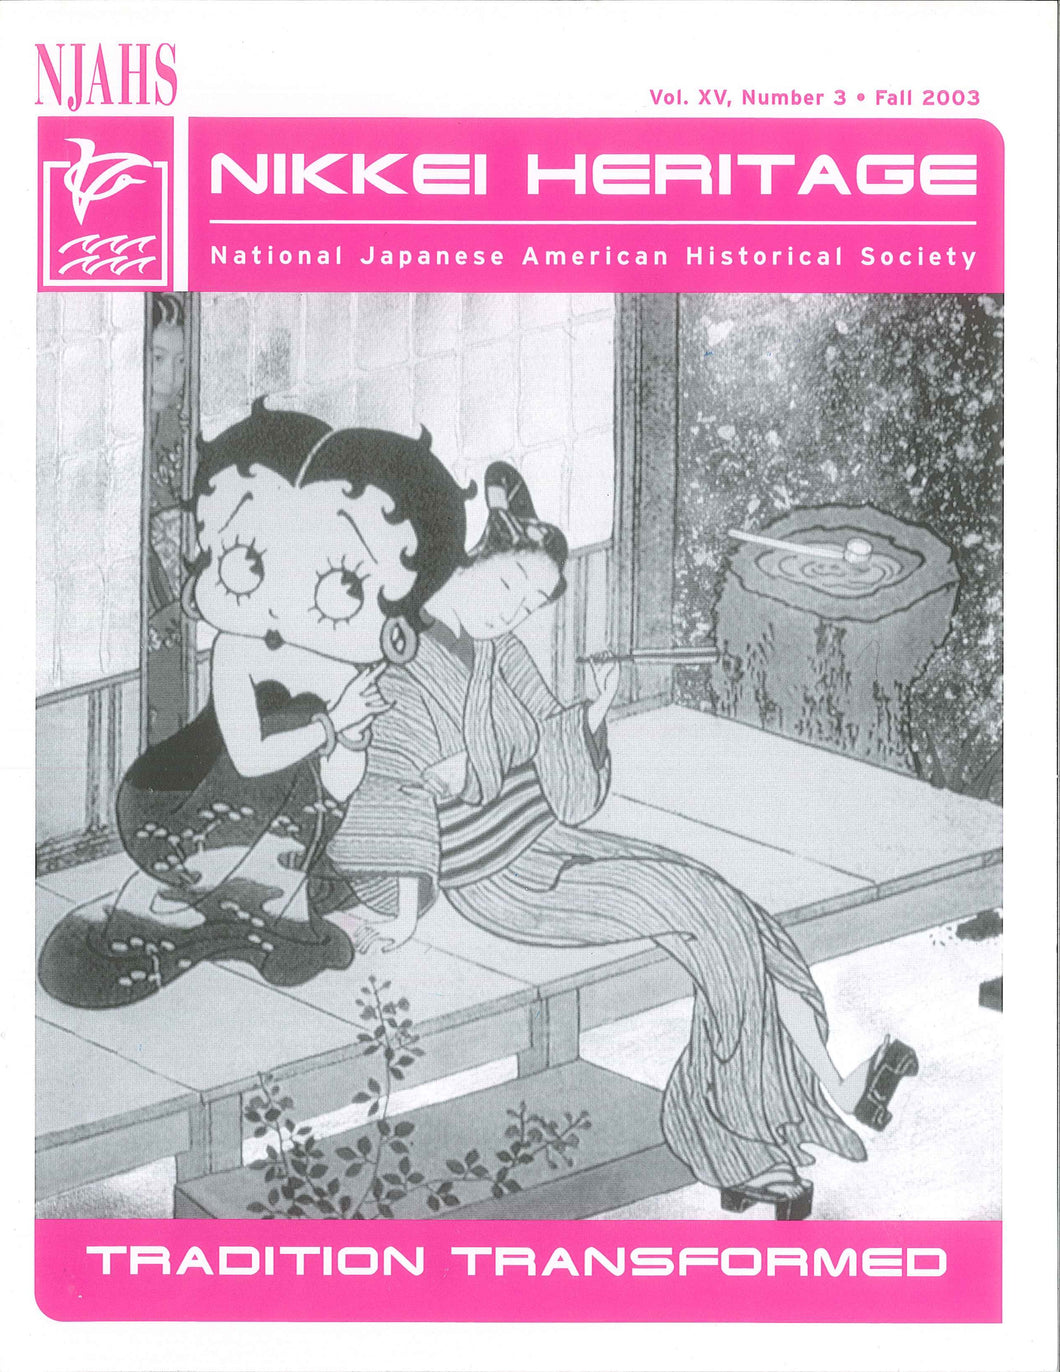 Nikkei Heritage - Tradition Transformed